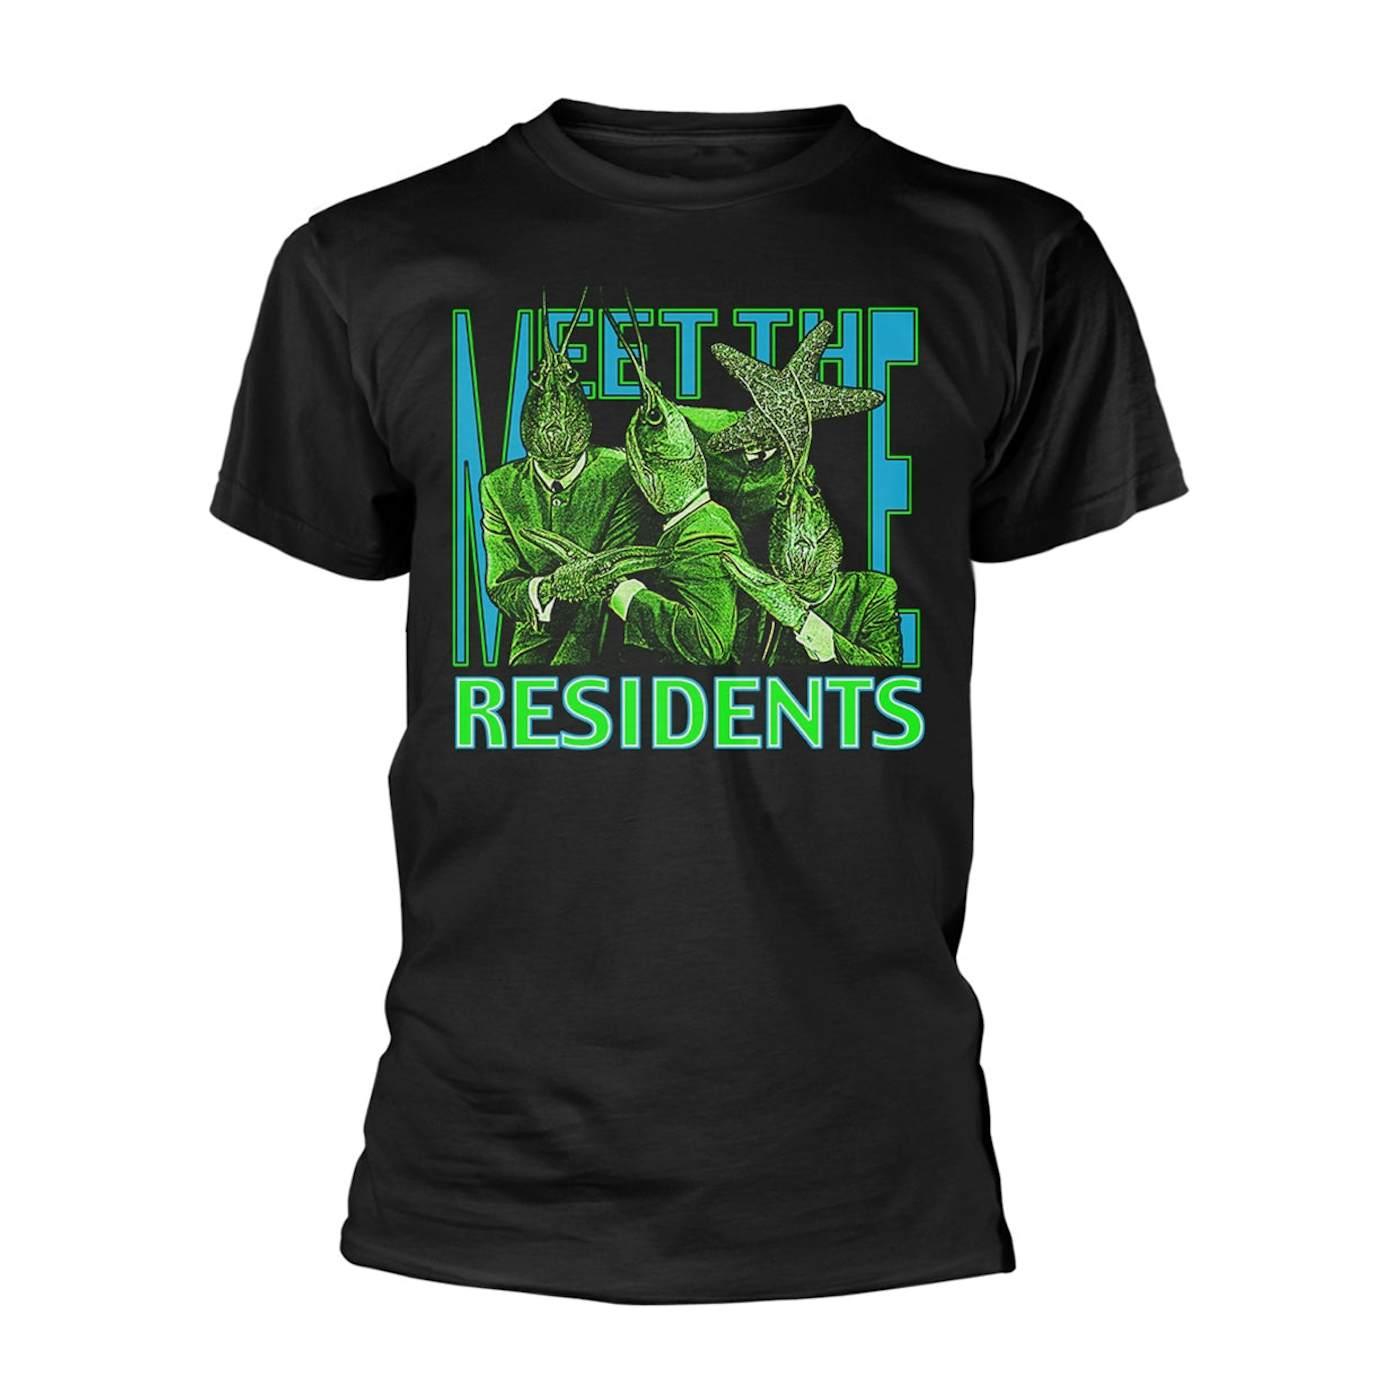 The Residents T Shirt - Meet The Residents